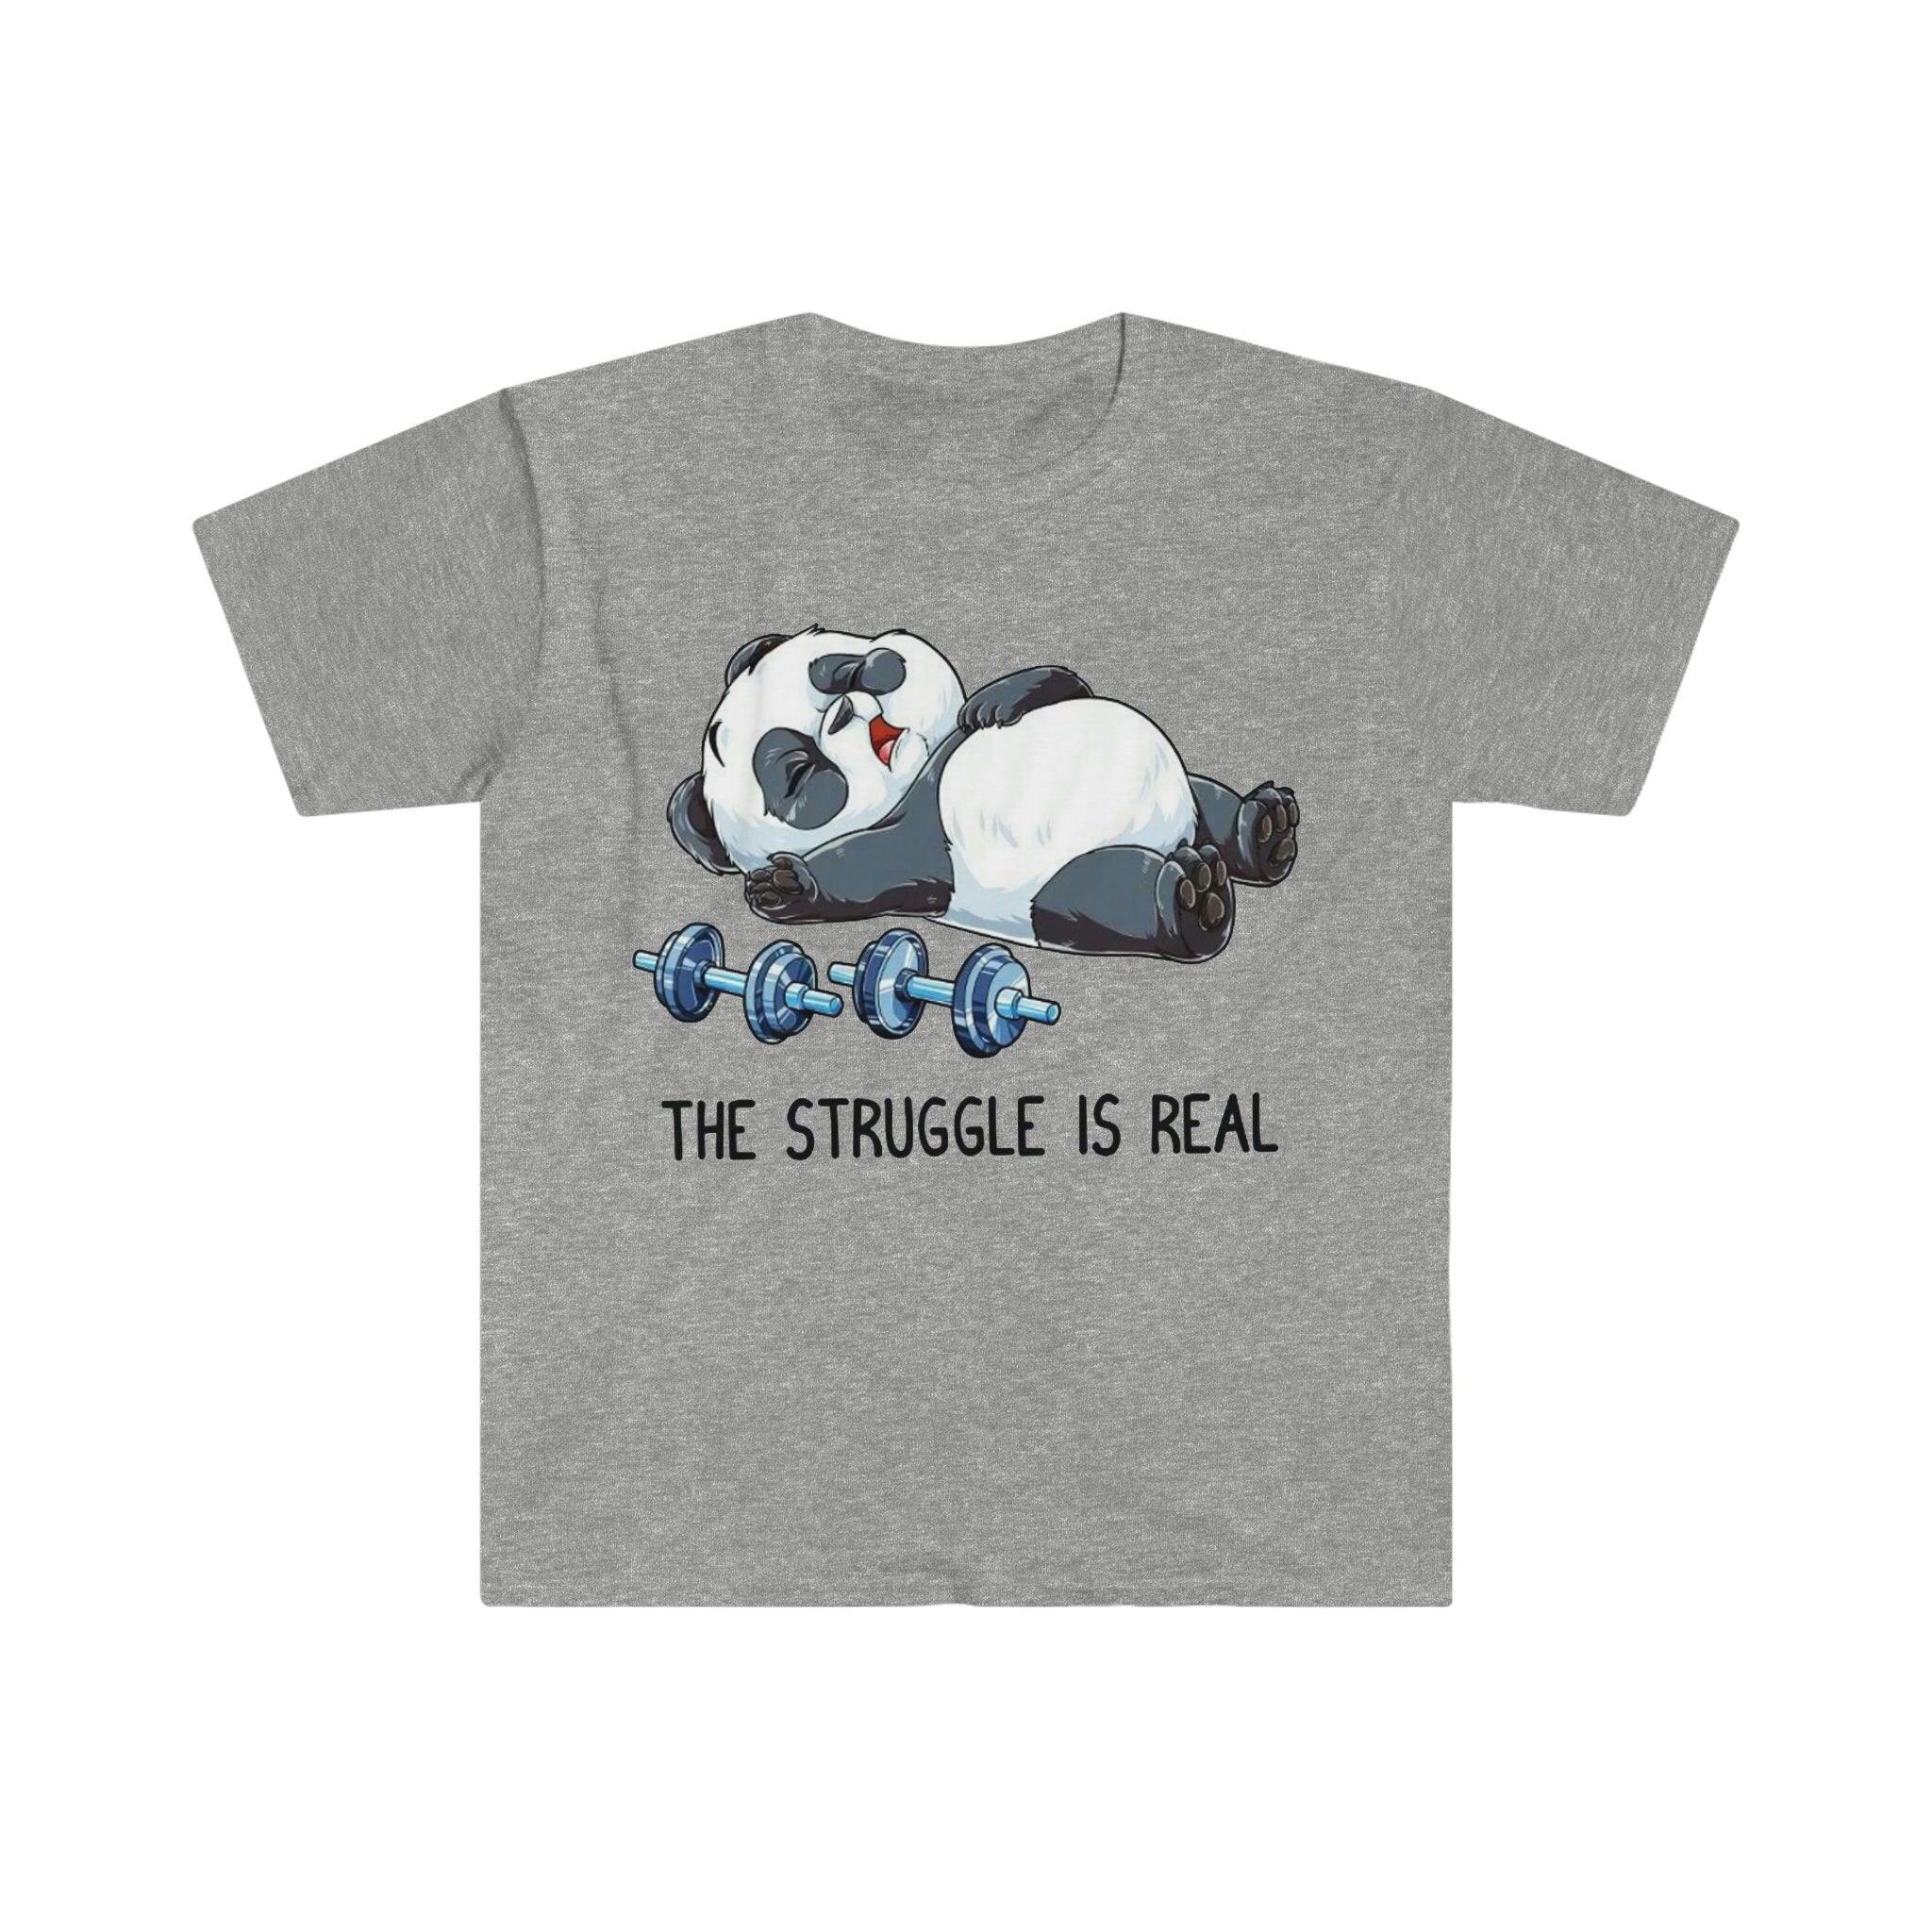 The Struggle Is Real Panda Weightlifting T-Shirts, Weightlifting Fitness Gym Funny T-Shirt, Workout Shirt ,Fitness Shirt Beast mode weight, Fitness funny, Fitness Gym, Fitness Shirt, funny sarcastic gymn, Funny T-Shirt, gymn exercise tee, panda struggle, struggle is real, Tee, tees, Weightlifting, weightlifting panda, weightlifting tee, Workout Shirt - plusminusco.com